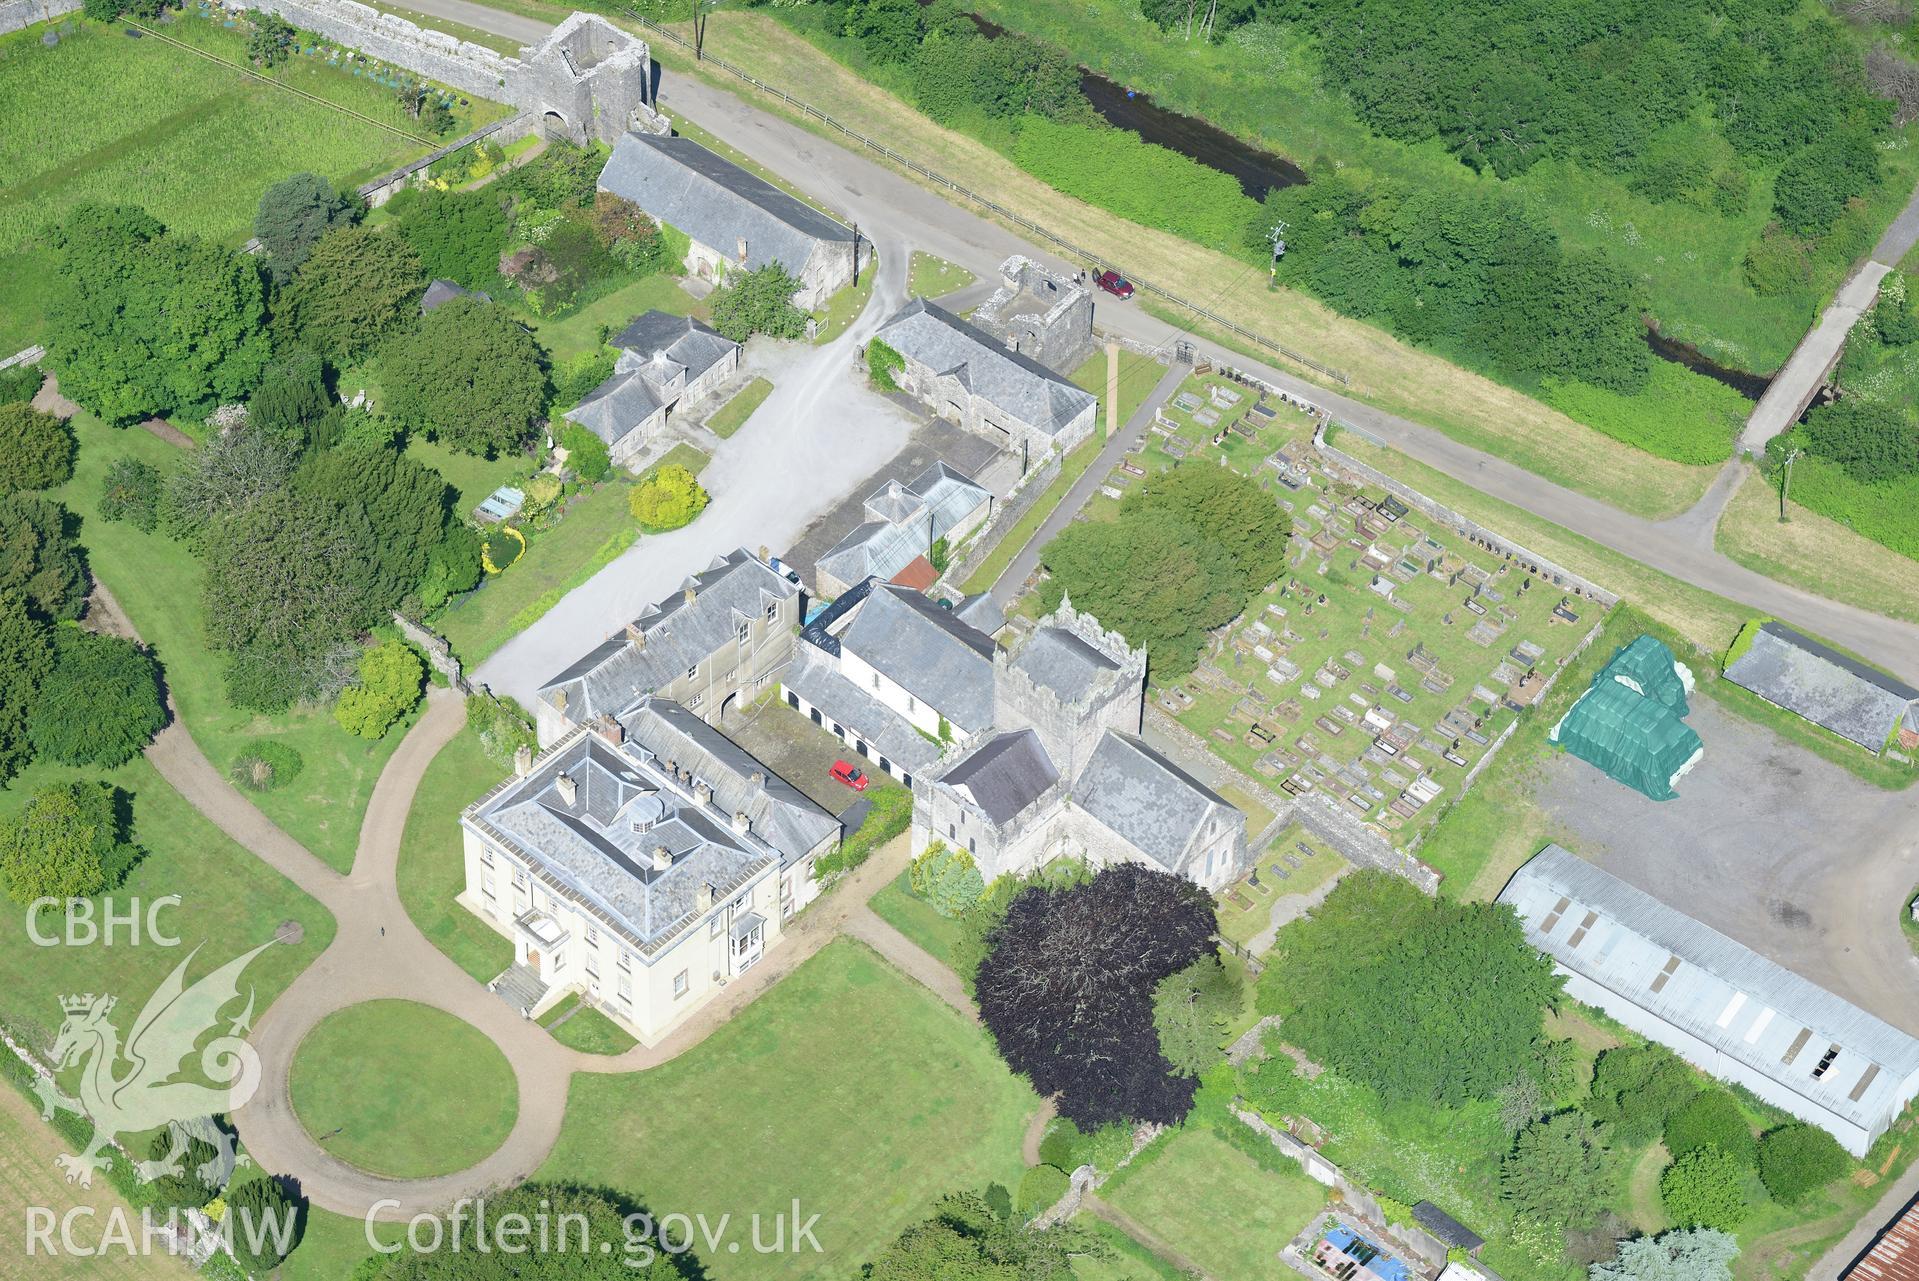 Ewenny Priory including views of the south and north gatehouses; Priory House; north tower and St. Michael's church. Oblique aerial photograph taken during the Royal Commission's programme of archaeological aerial reconnaissance by Toby Driver on 19th June 2015.